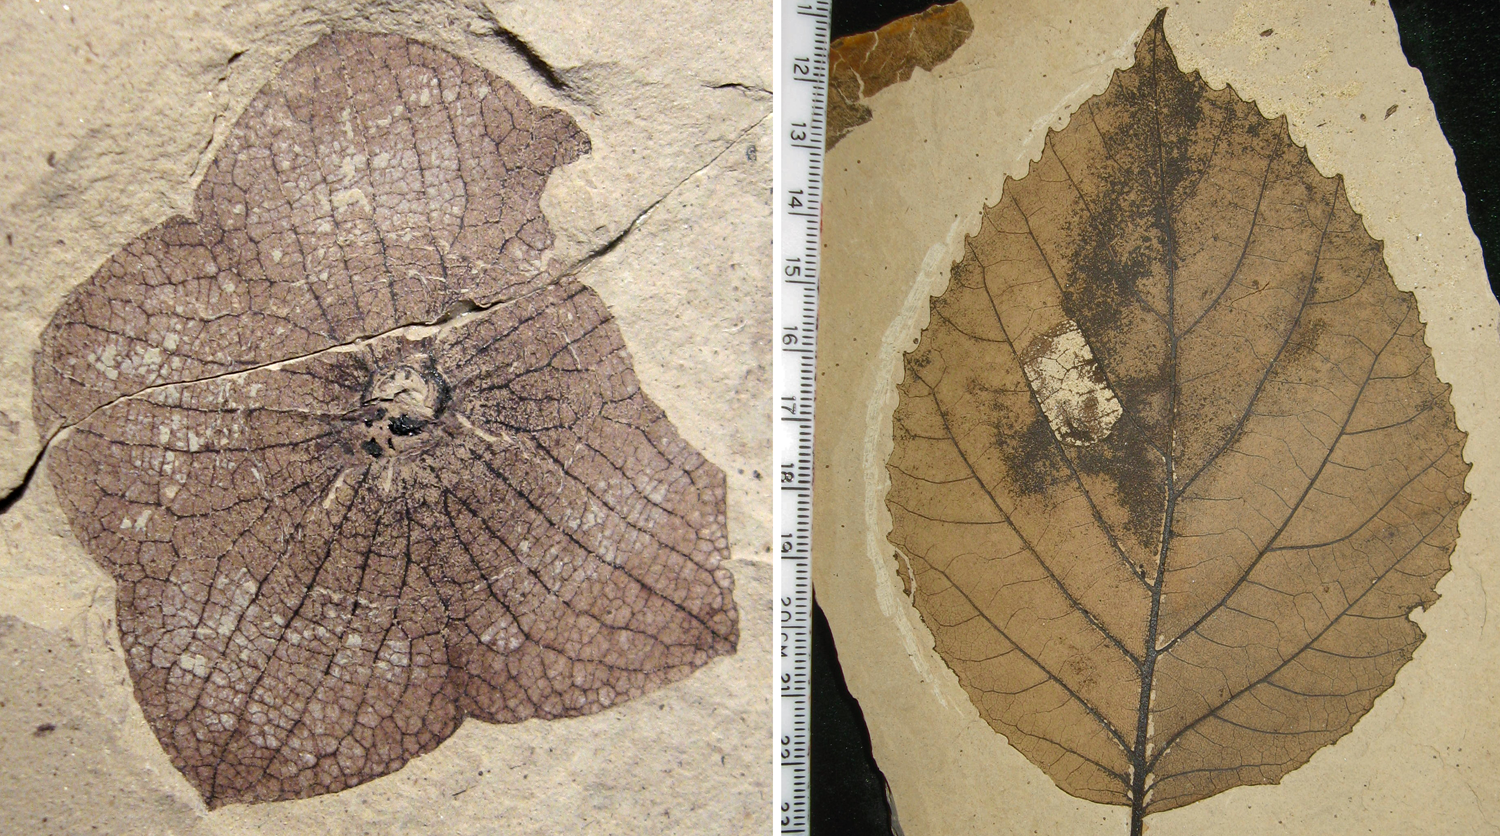 2-Panel figure showing fossil eudicots. Panel 1: 5-parted calyx of Florissantia. Panel 2: Fossil leaf of Langeria showing pinnate venation.